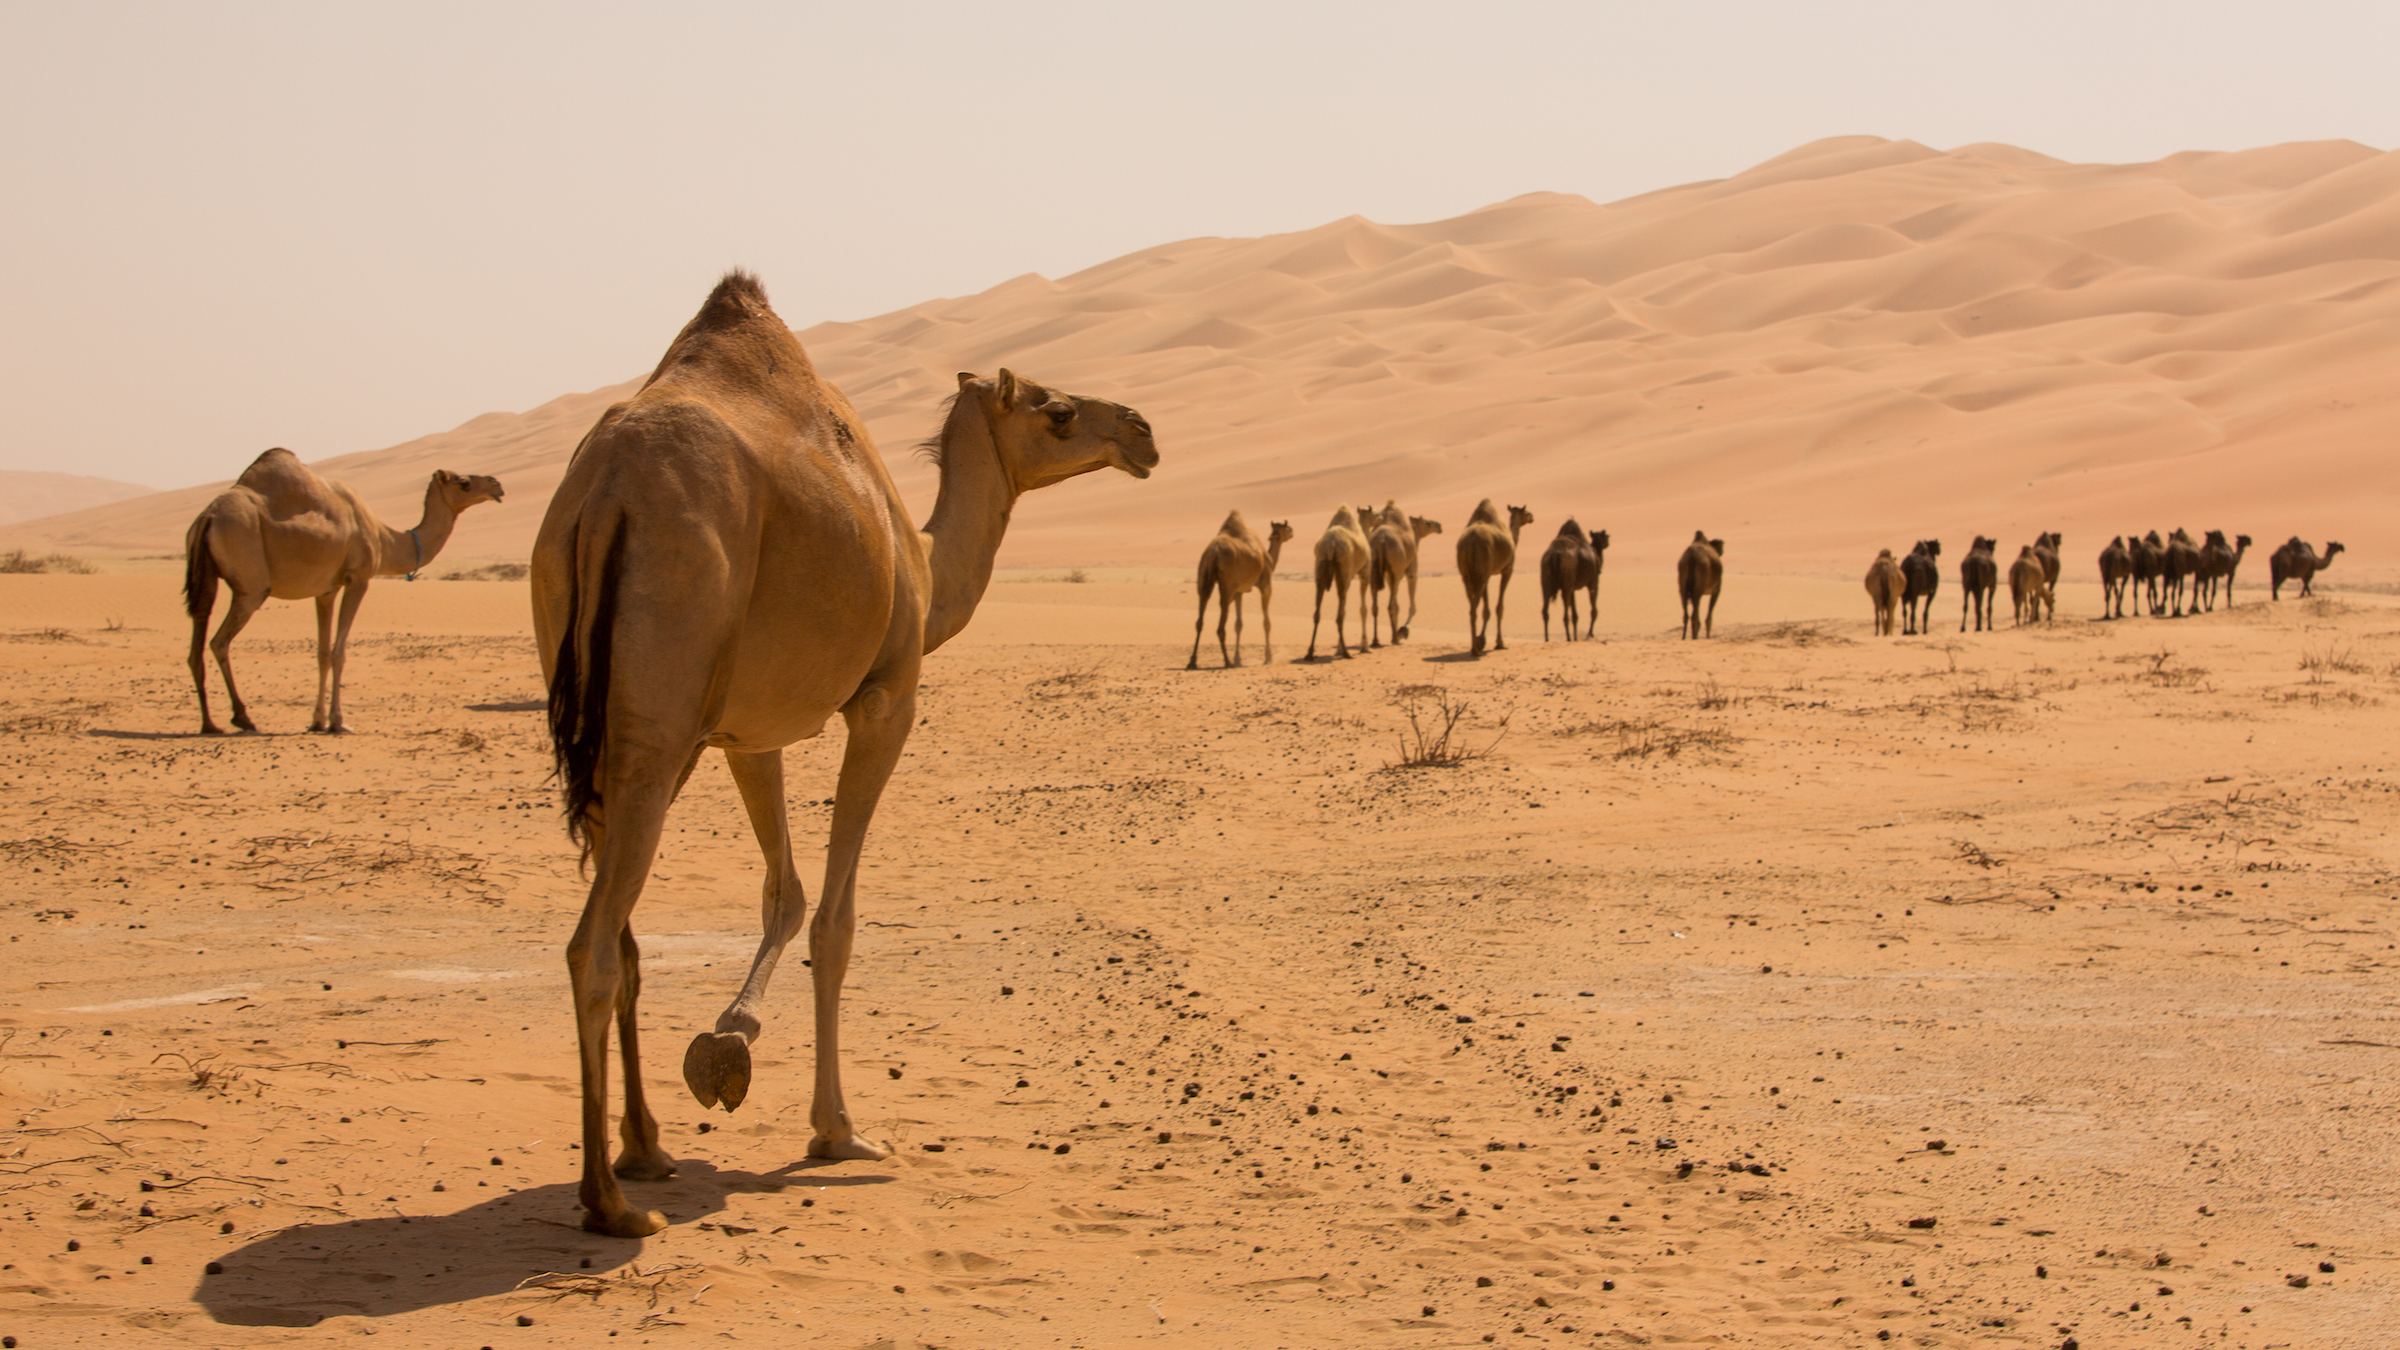 Do camels really have water in their humps? | Live Science